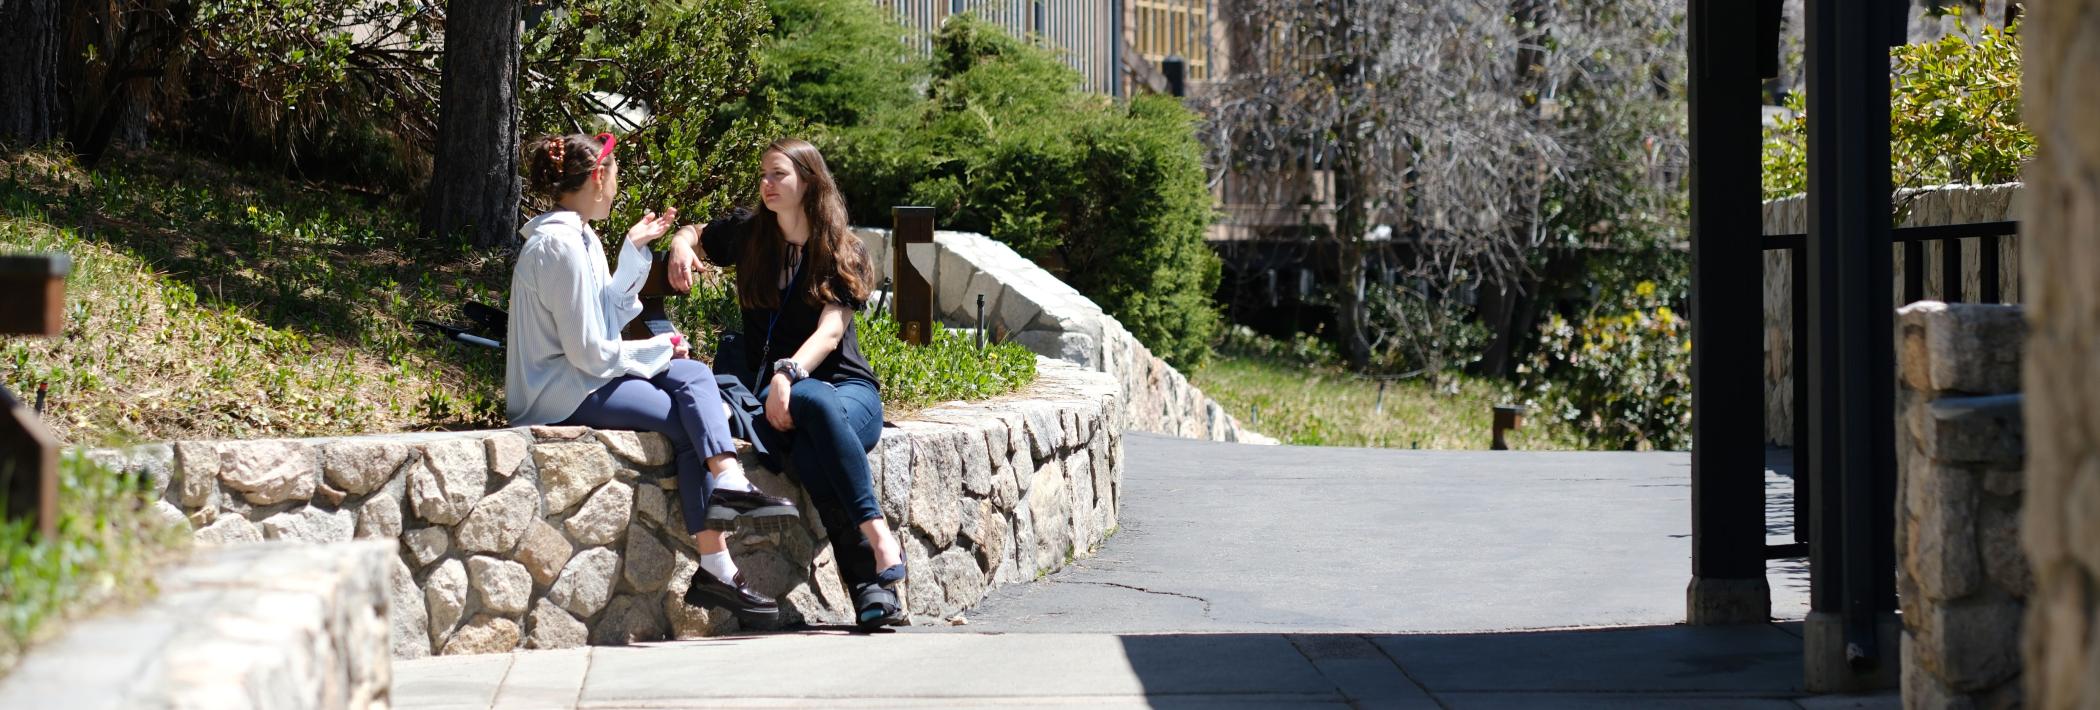 Two young women sit on a short stone wall and engage in conversation.